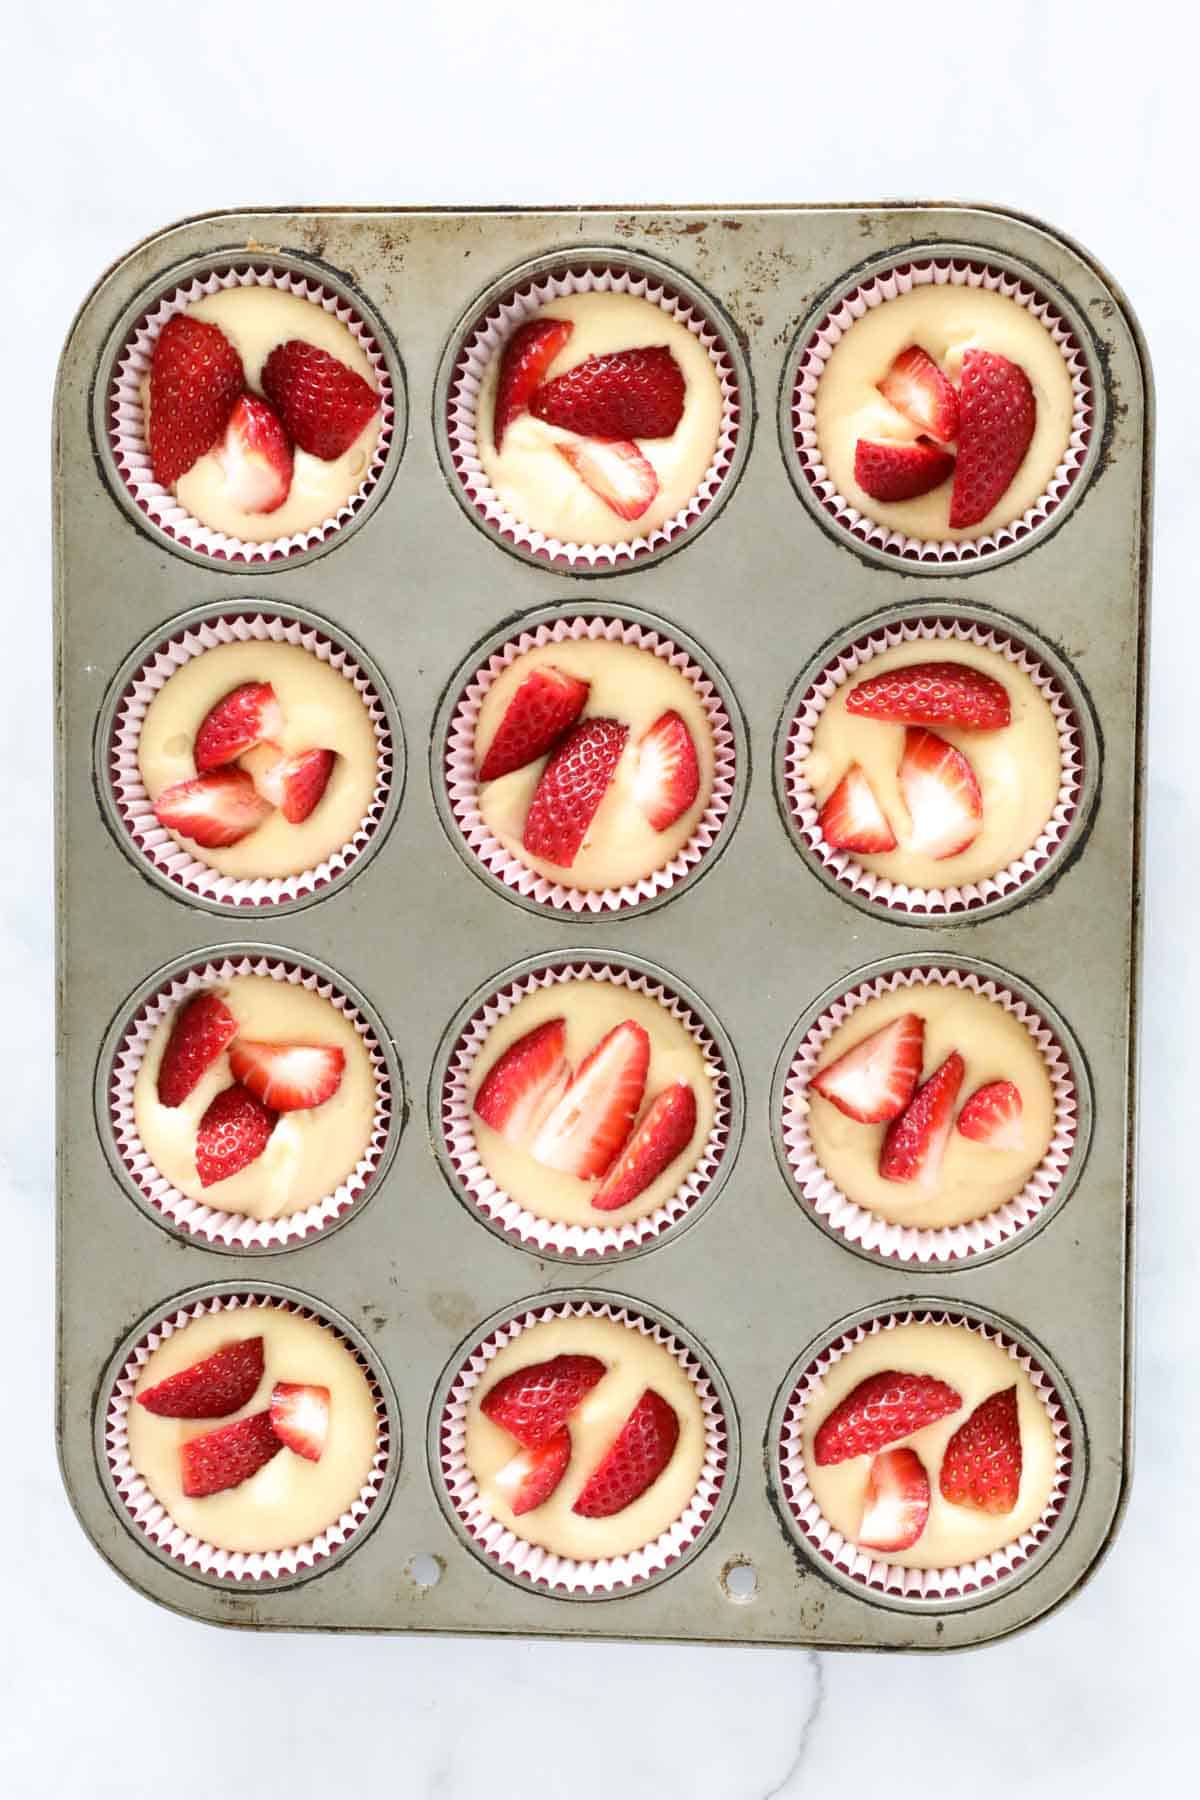 Strawberries in cupcake mixture in a muffin tin.